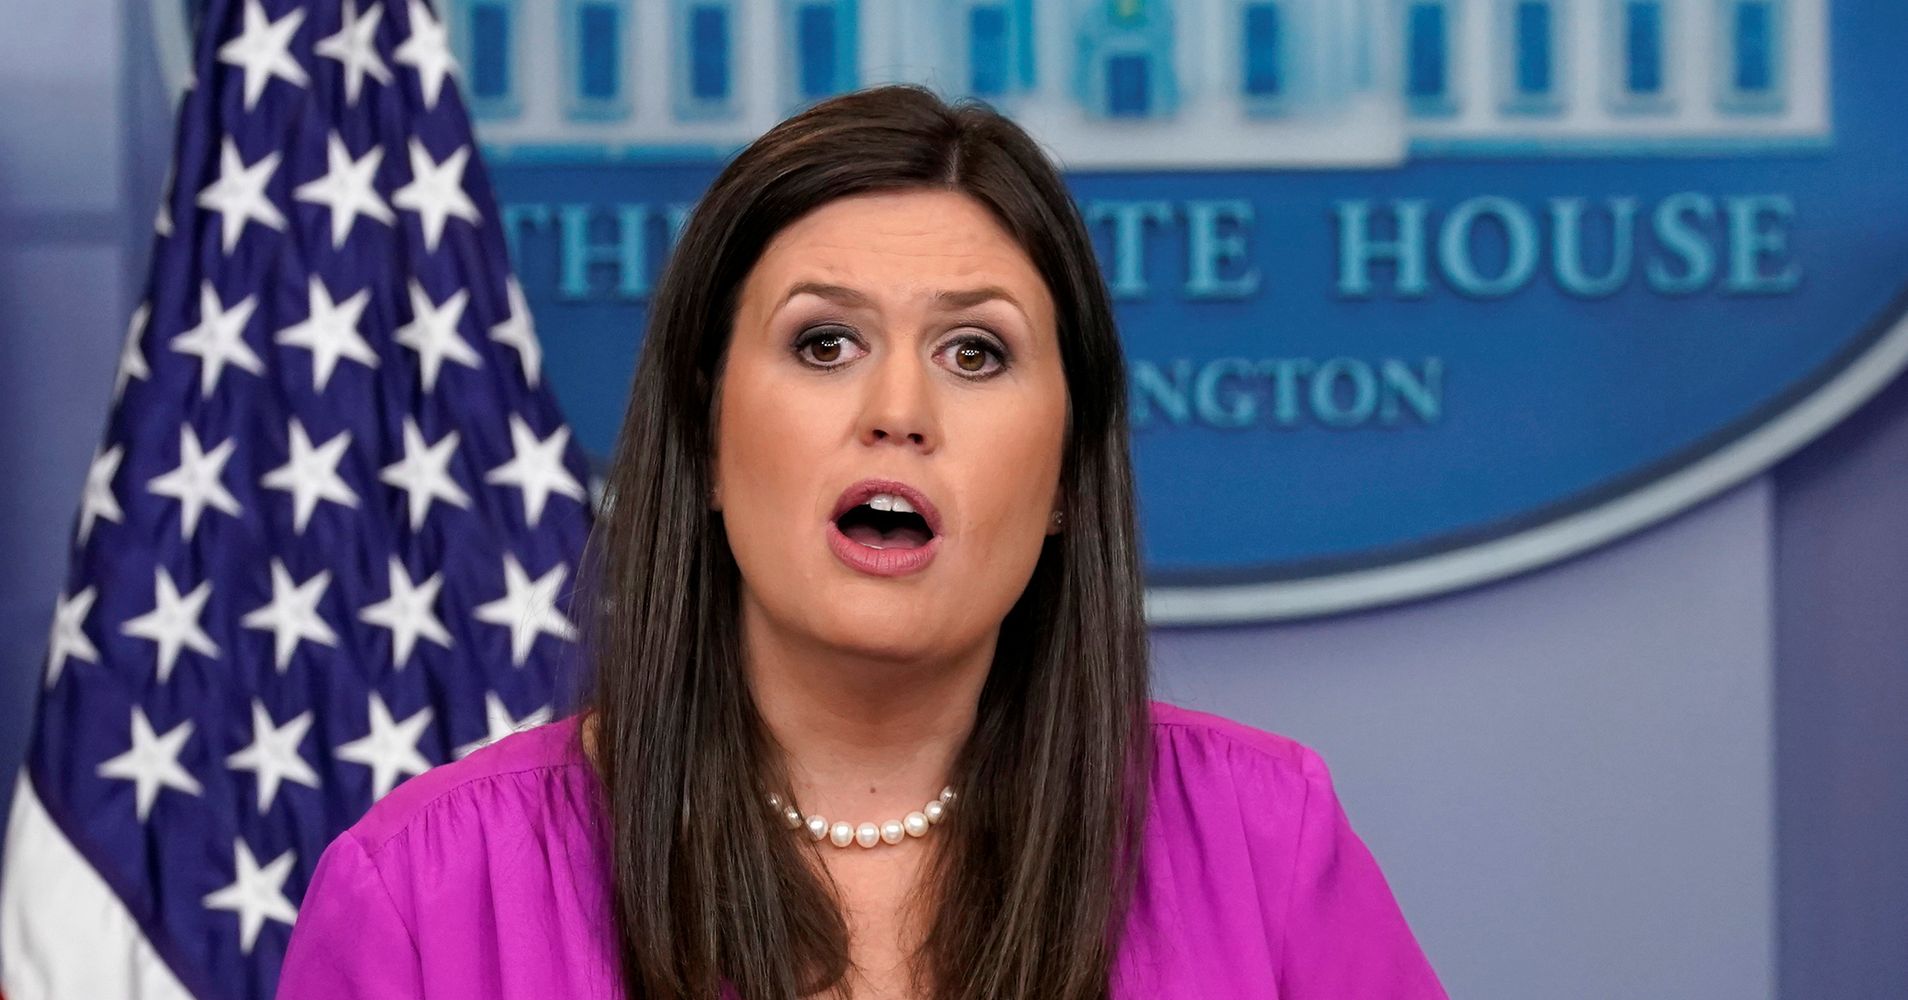 Reporter Challenges Sarah Huckabee Sanders After She Rants About 'Constant Barrage Of Fake News'